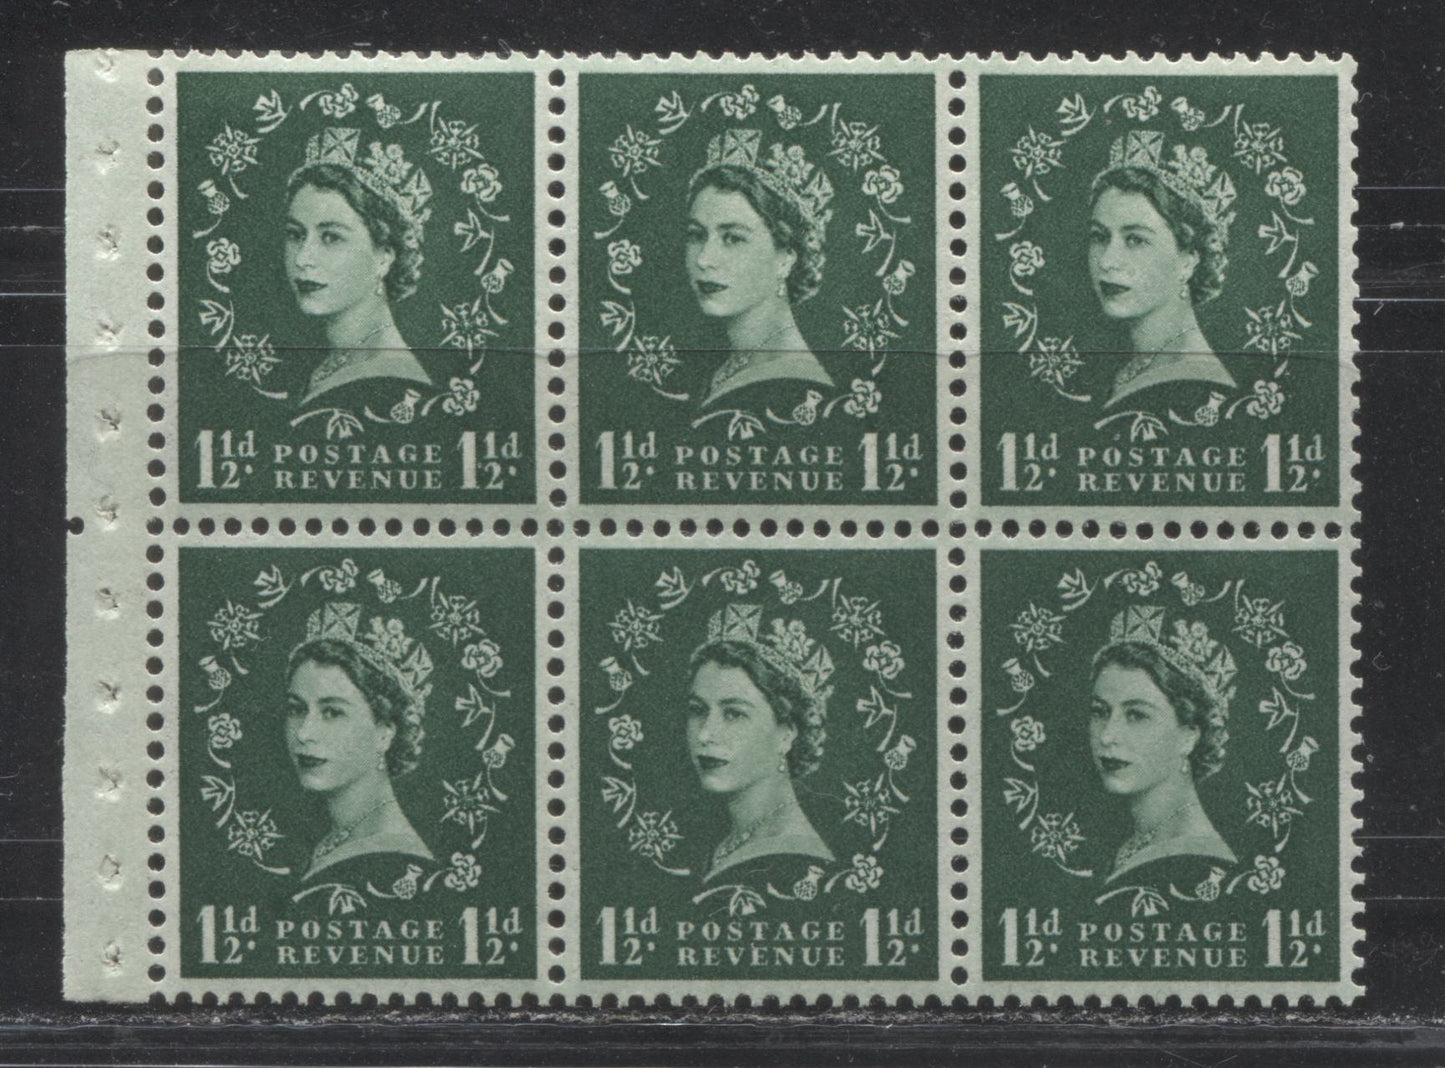 Great Britain SG#M9 3/- Deep Red & Black Cover 1956-1959 Wilding Issue, A Complete Counter Booklet With Upright Multiple St. Edward's Crown Watermark, Panes of 6, Type B GPO Cypher, November 1958